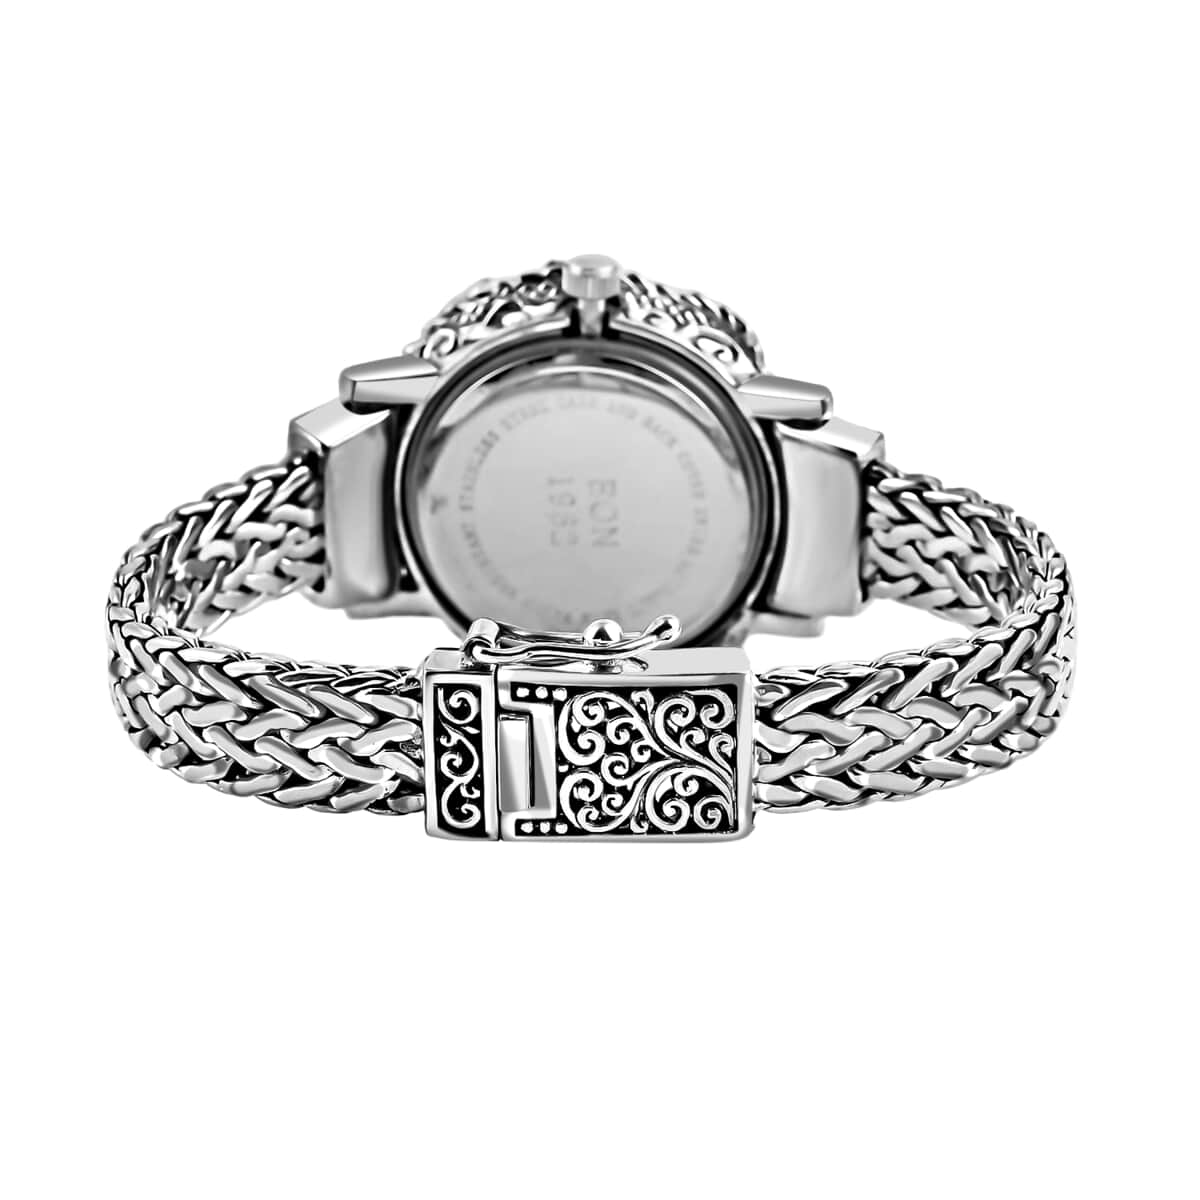 Bali Legacy Eon 1962 Swiss Movement MOP Dial Dragon Case Bracelet Watch in Sterling Silver (7.50 in), Vintage Casual Bracelet Watch, Best Everyday Luxury Minimal Women's Watch, Analogue Watches image number 4